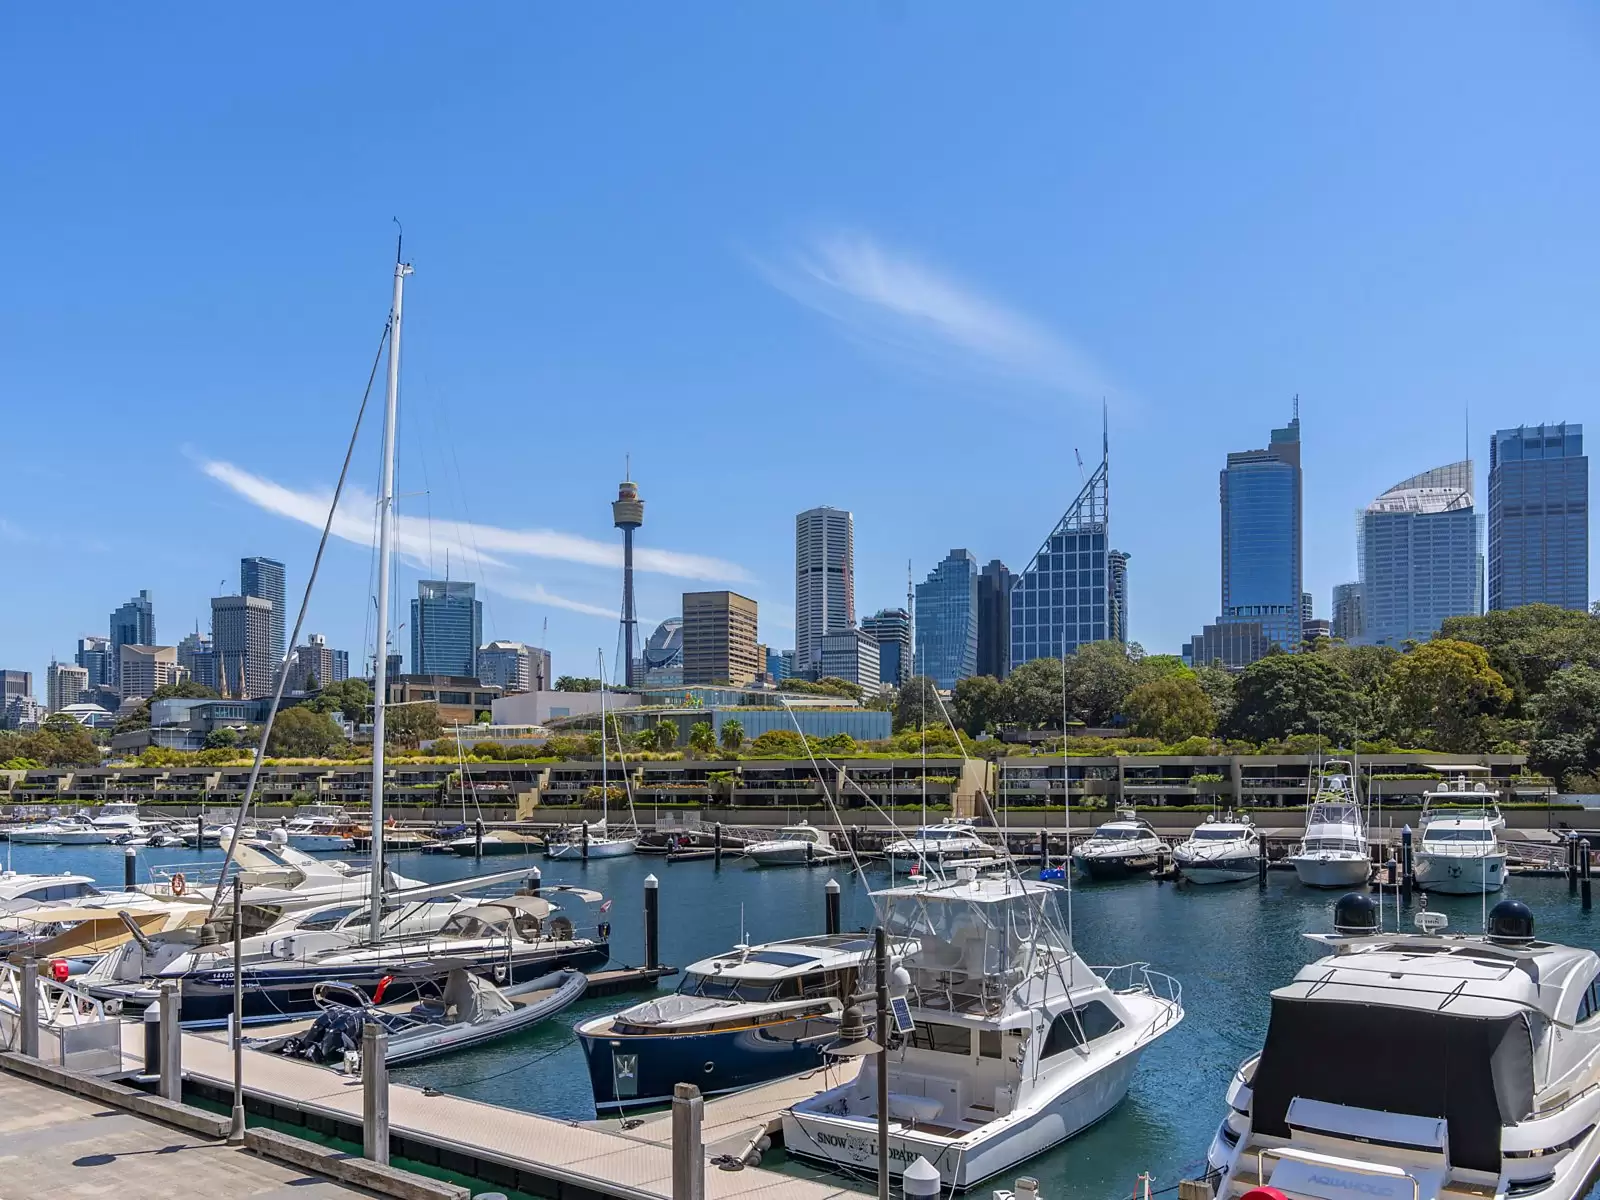 Photo #6: 212/6E Cowper Wharf Roadway, Woolloomooloo - For Sale by Sydney Sotheby's International Realty